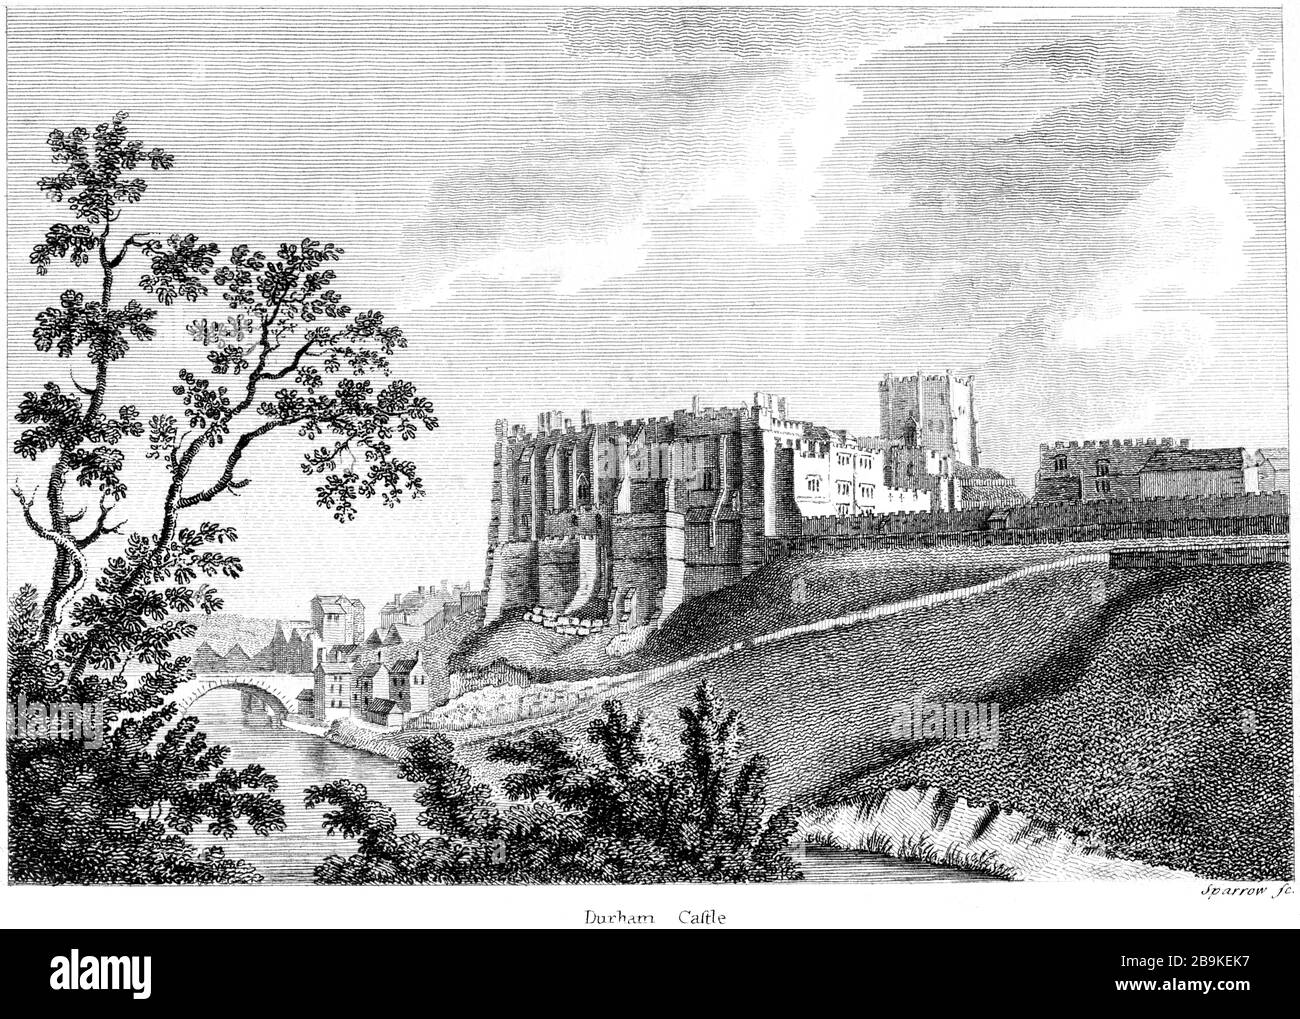 An engraving of Durham Castle UK scanned at high resolution from a book published around 1786. This image is believed to be free of all copyright. Stock Photo